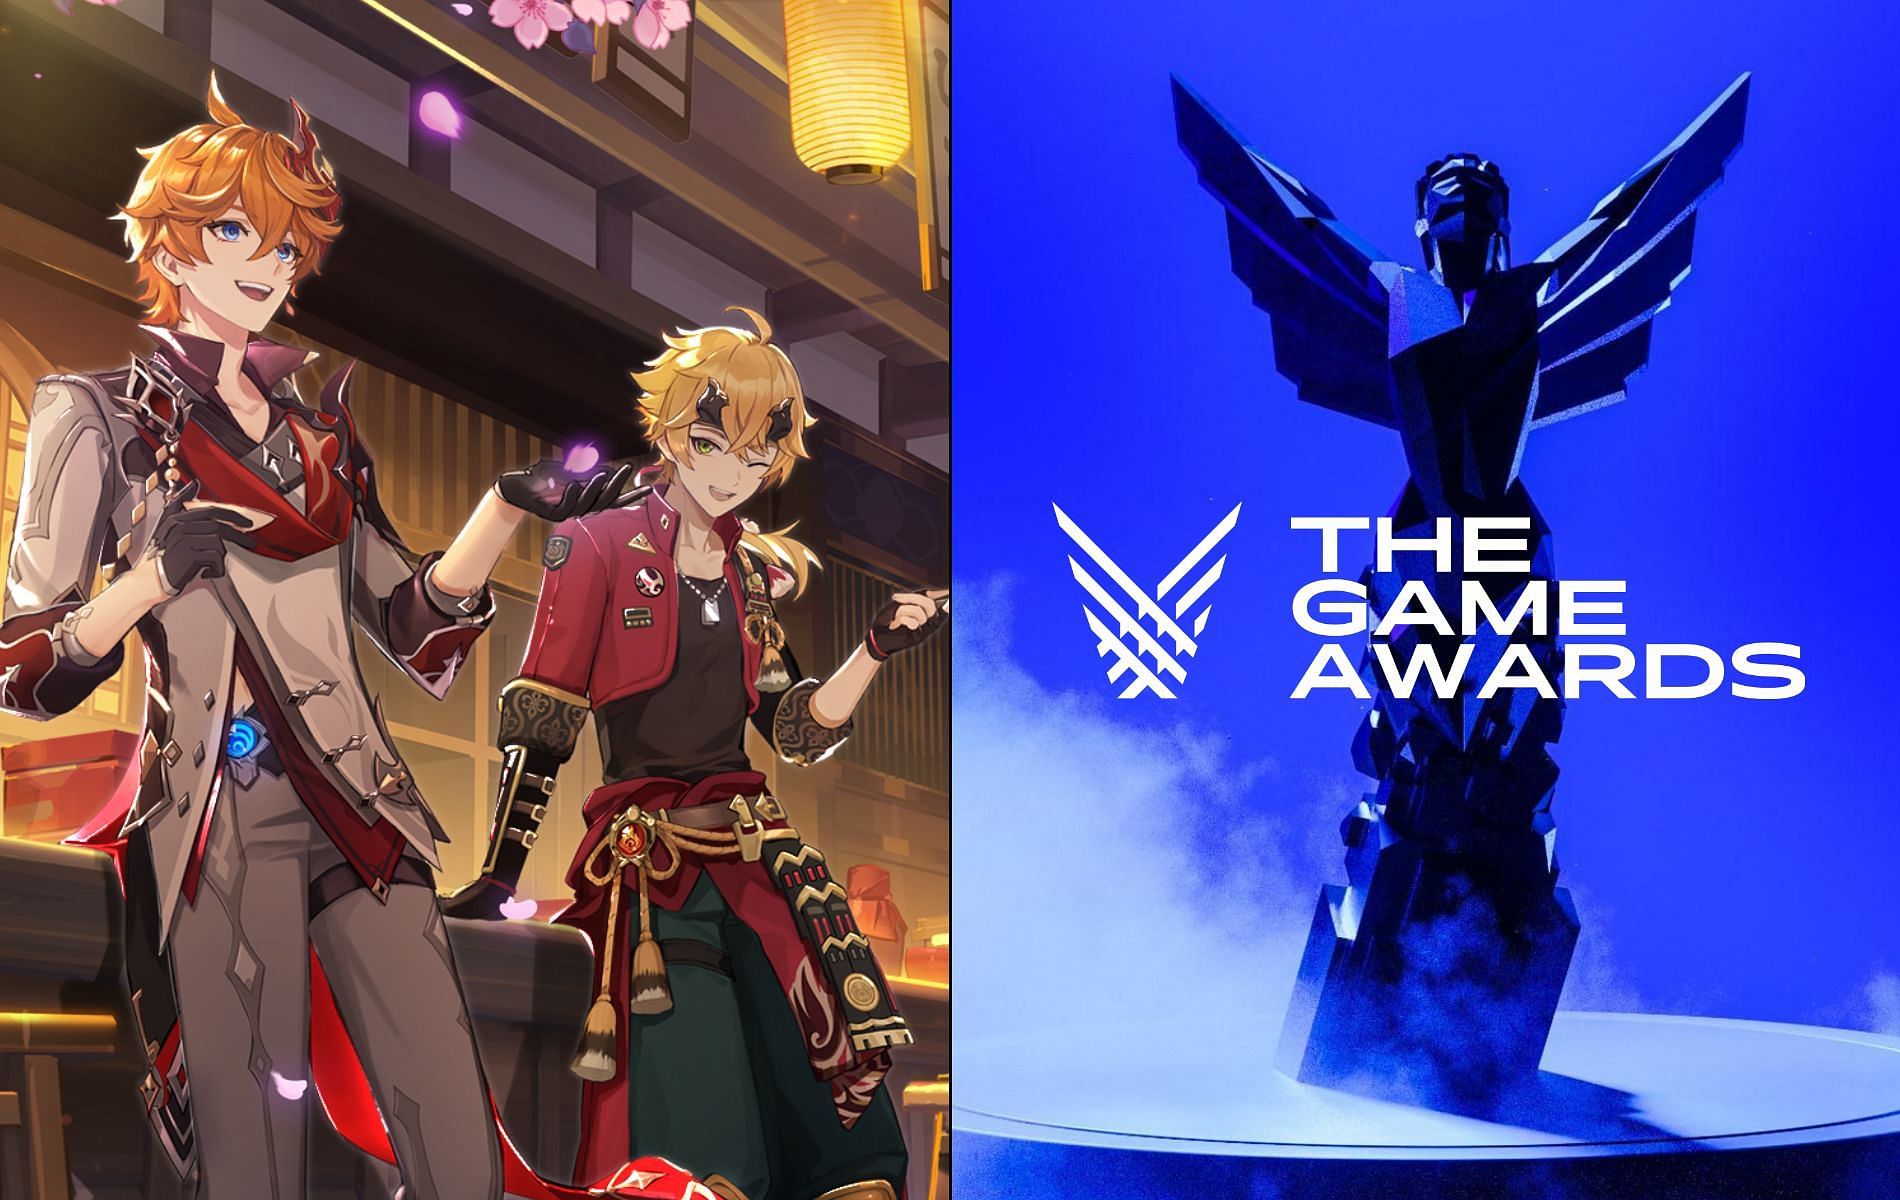 Genshin Impact fans might wish to vote for the game at The Game Awards 2021 (Image via miHoYo, The Game Awards 2021)